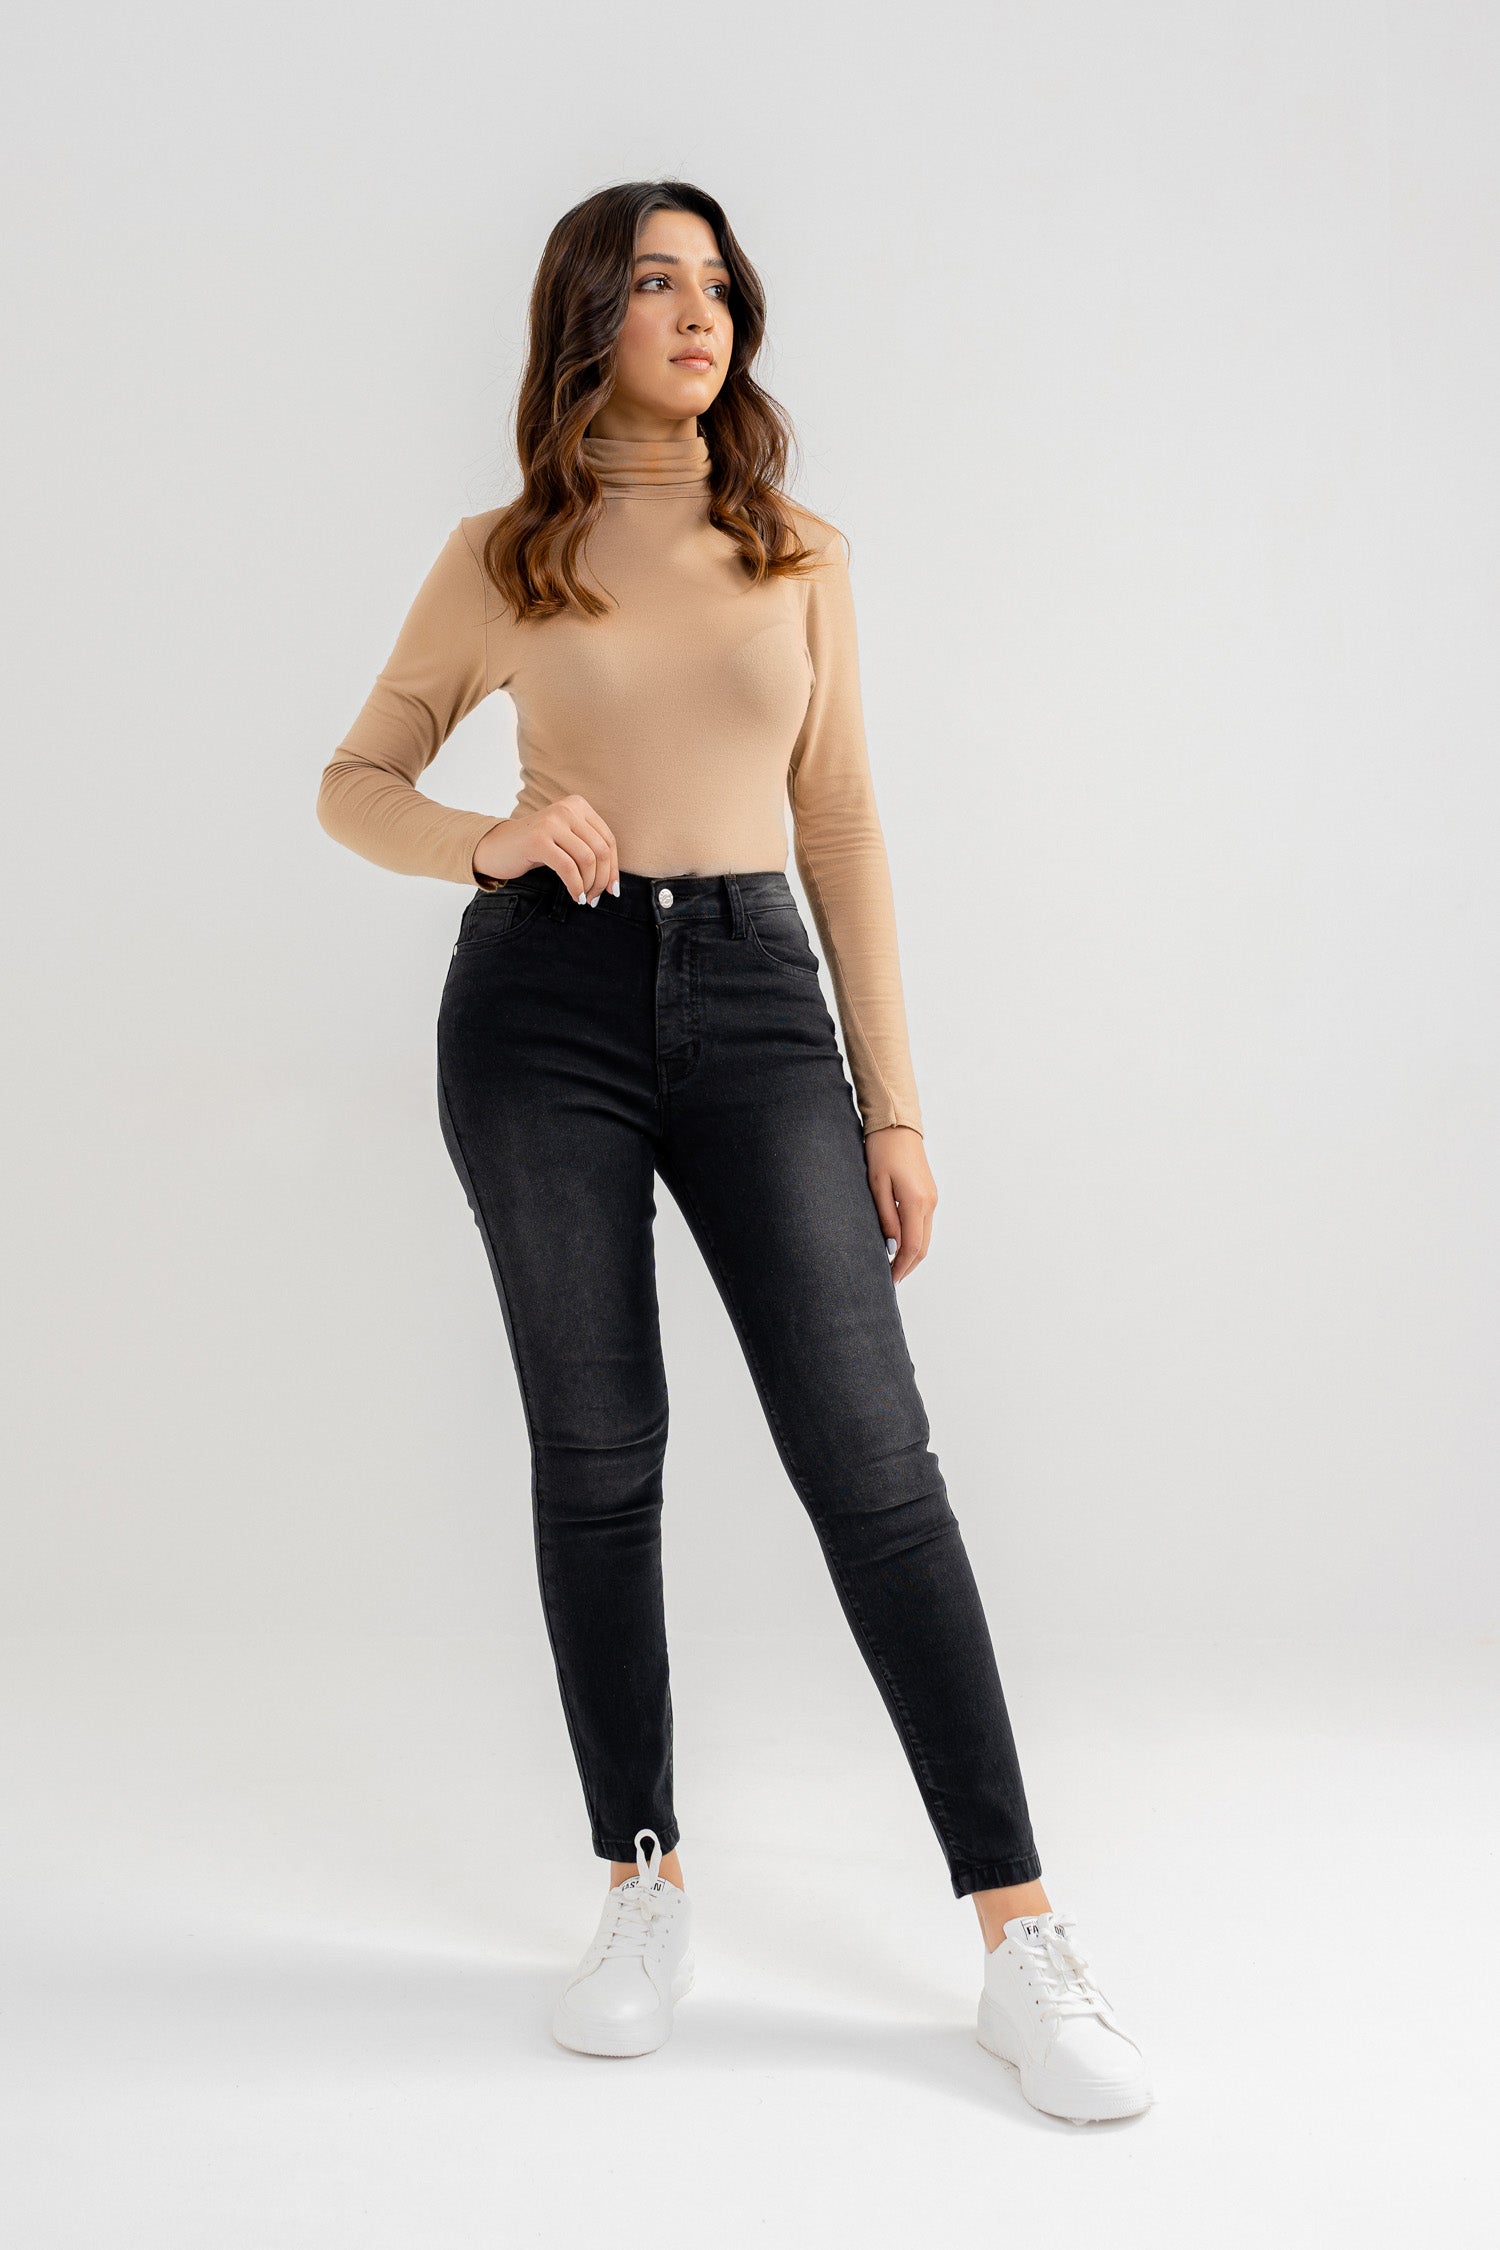 Meira Basic Fit Jeans